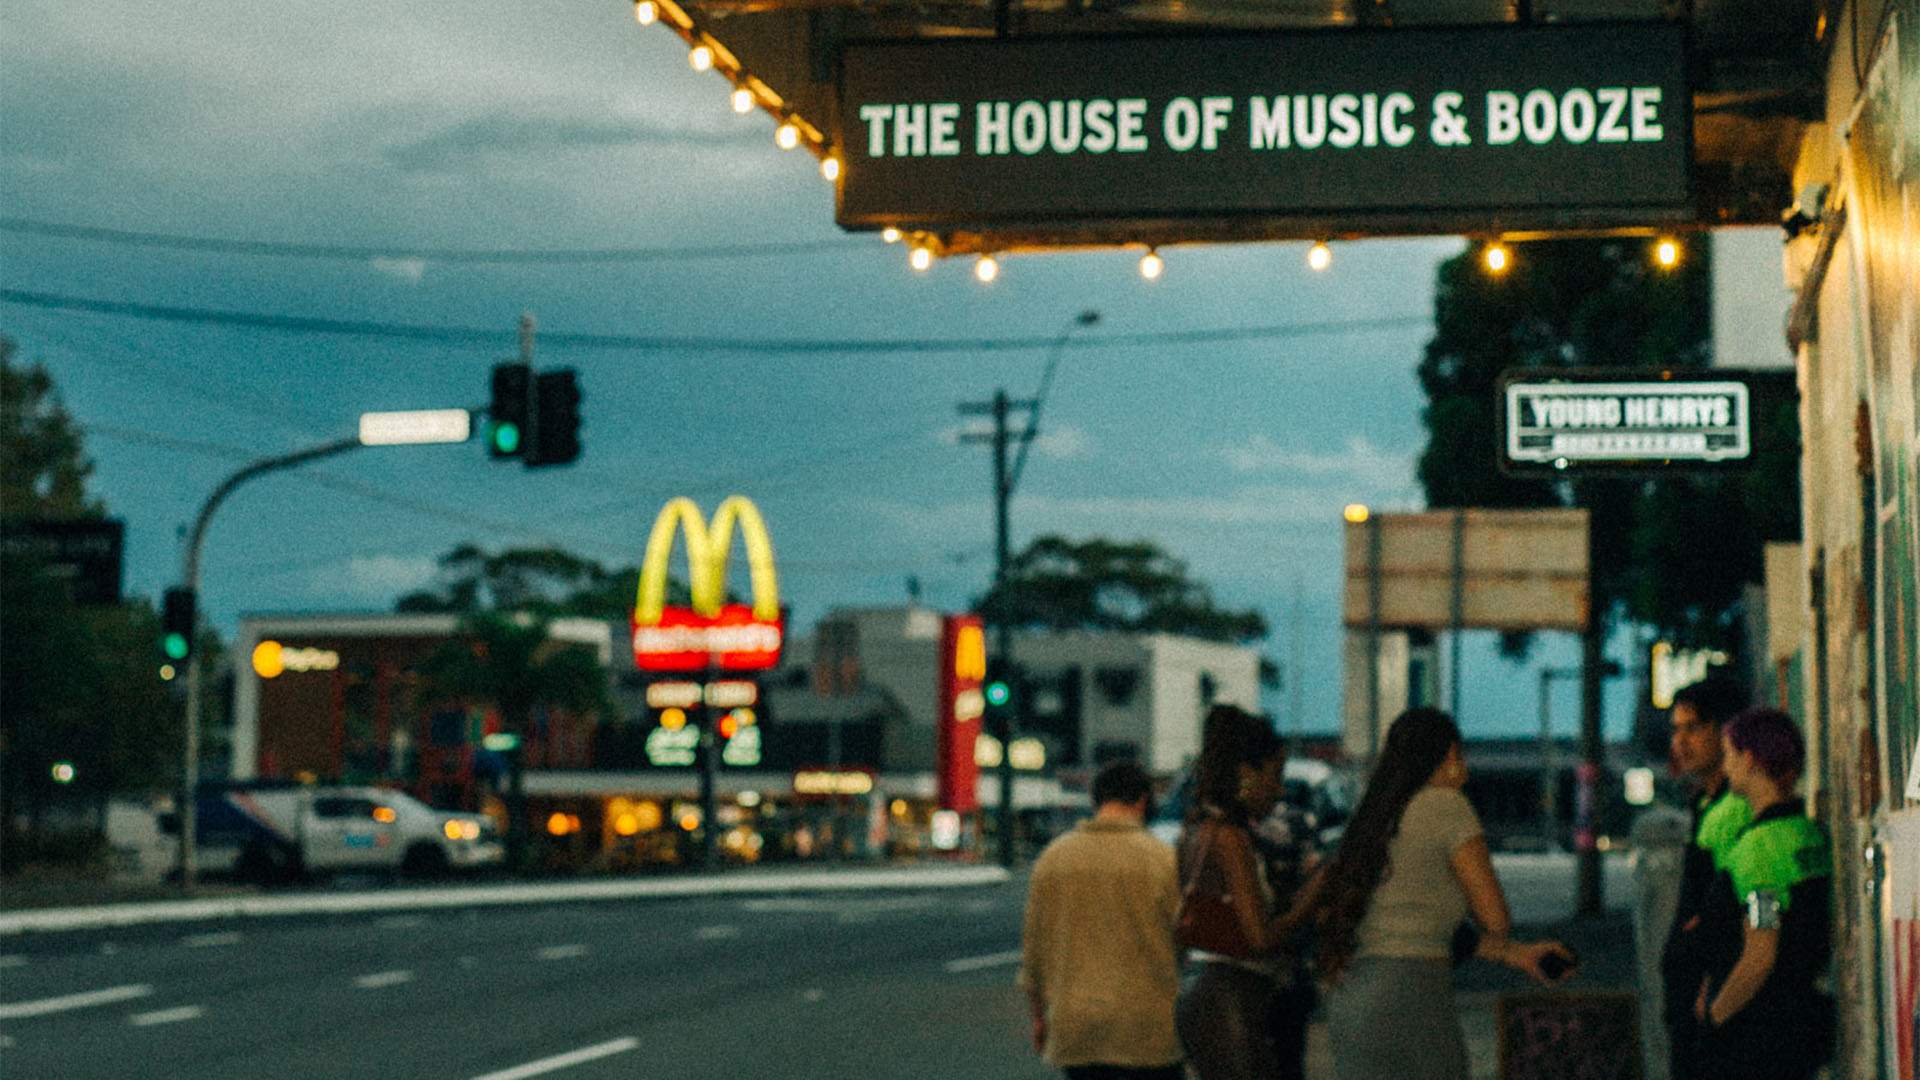 The House of Music & Booze